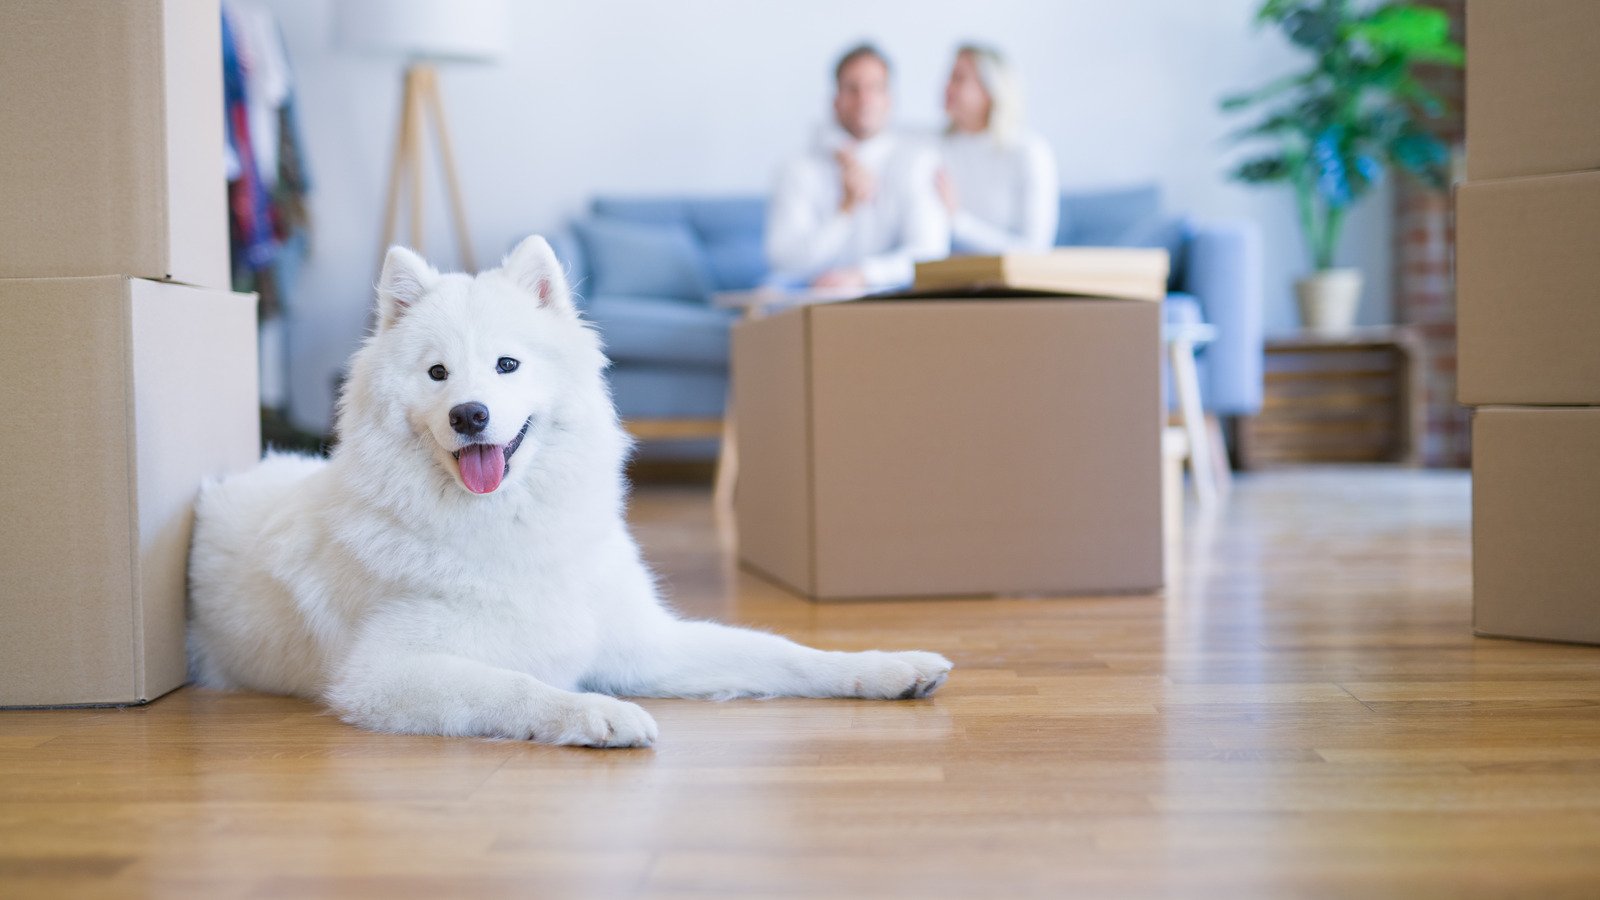 10 Tips To Help Prepare You For Moving With A Pet, According To An Expert